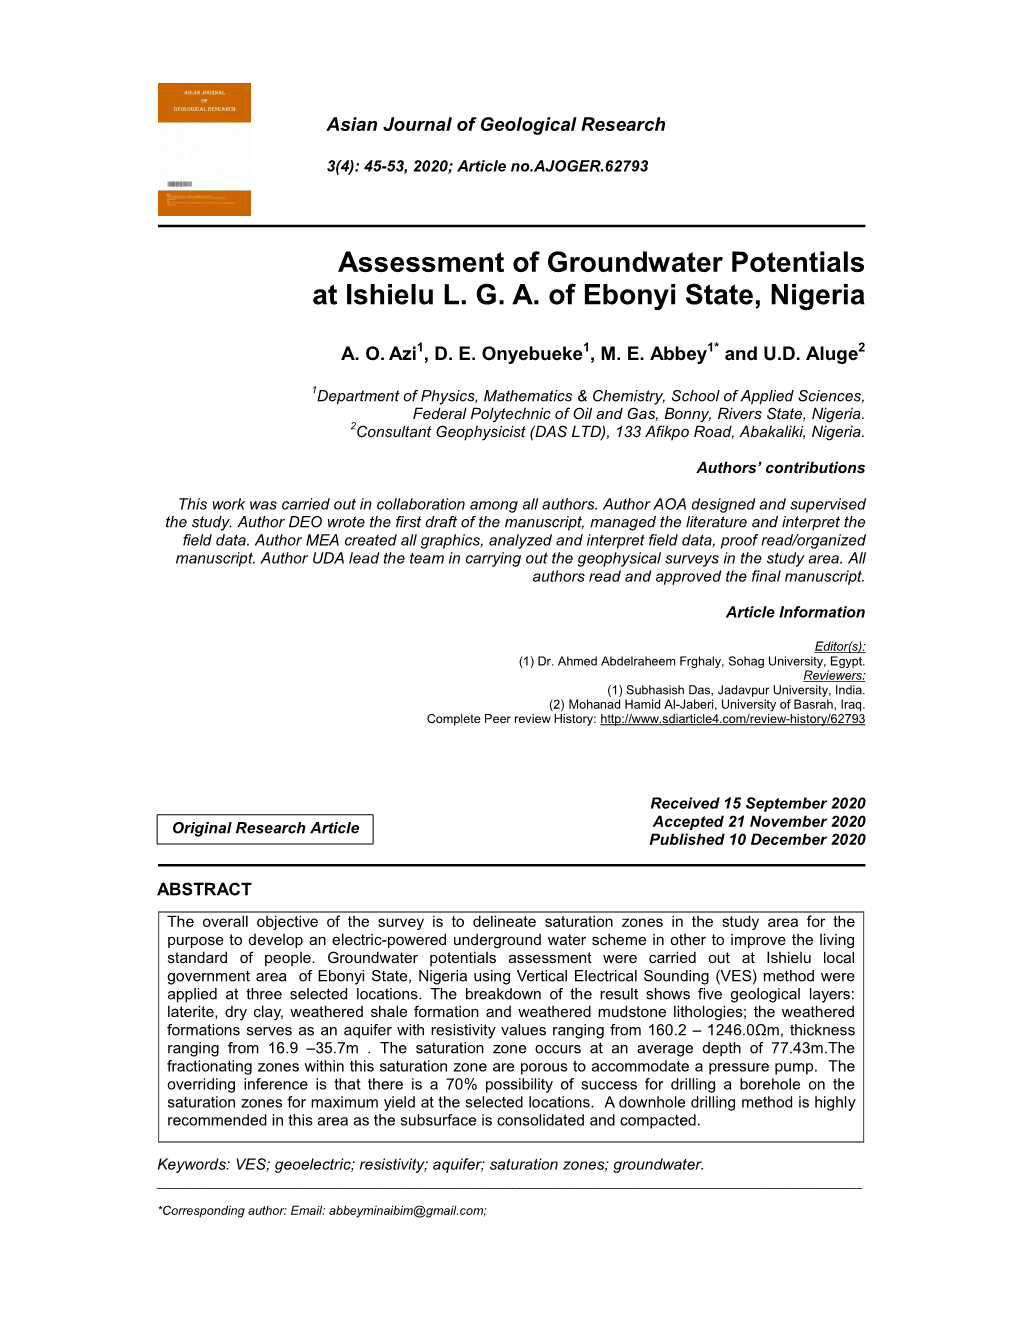 Assessment of Groundwater Potentials at Ishielu L. G. A. of Ebonyi State, Nigeria